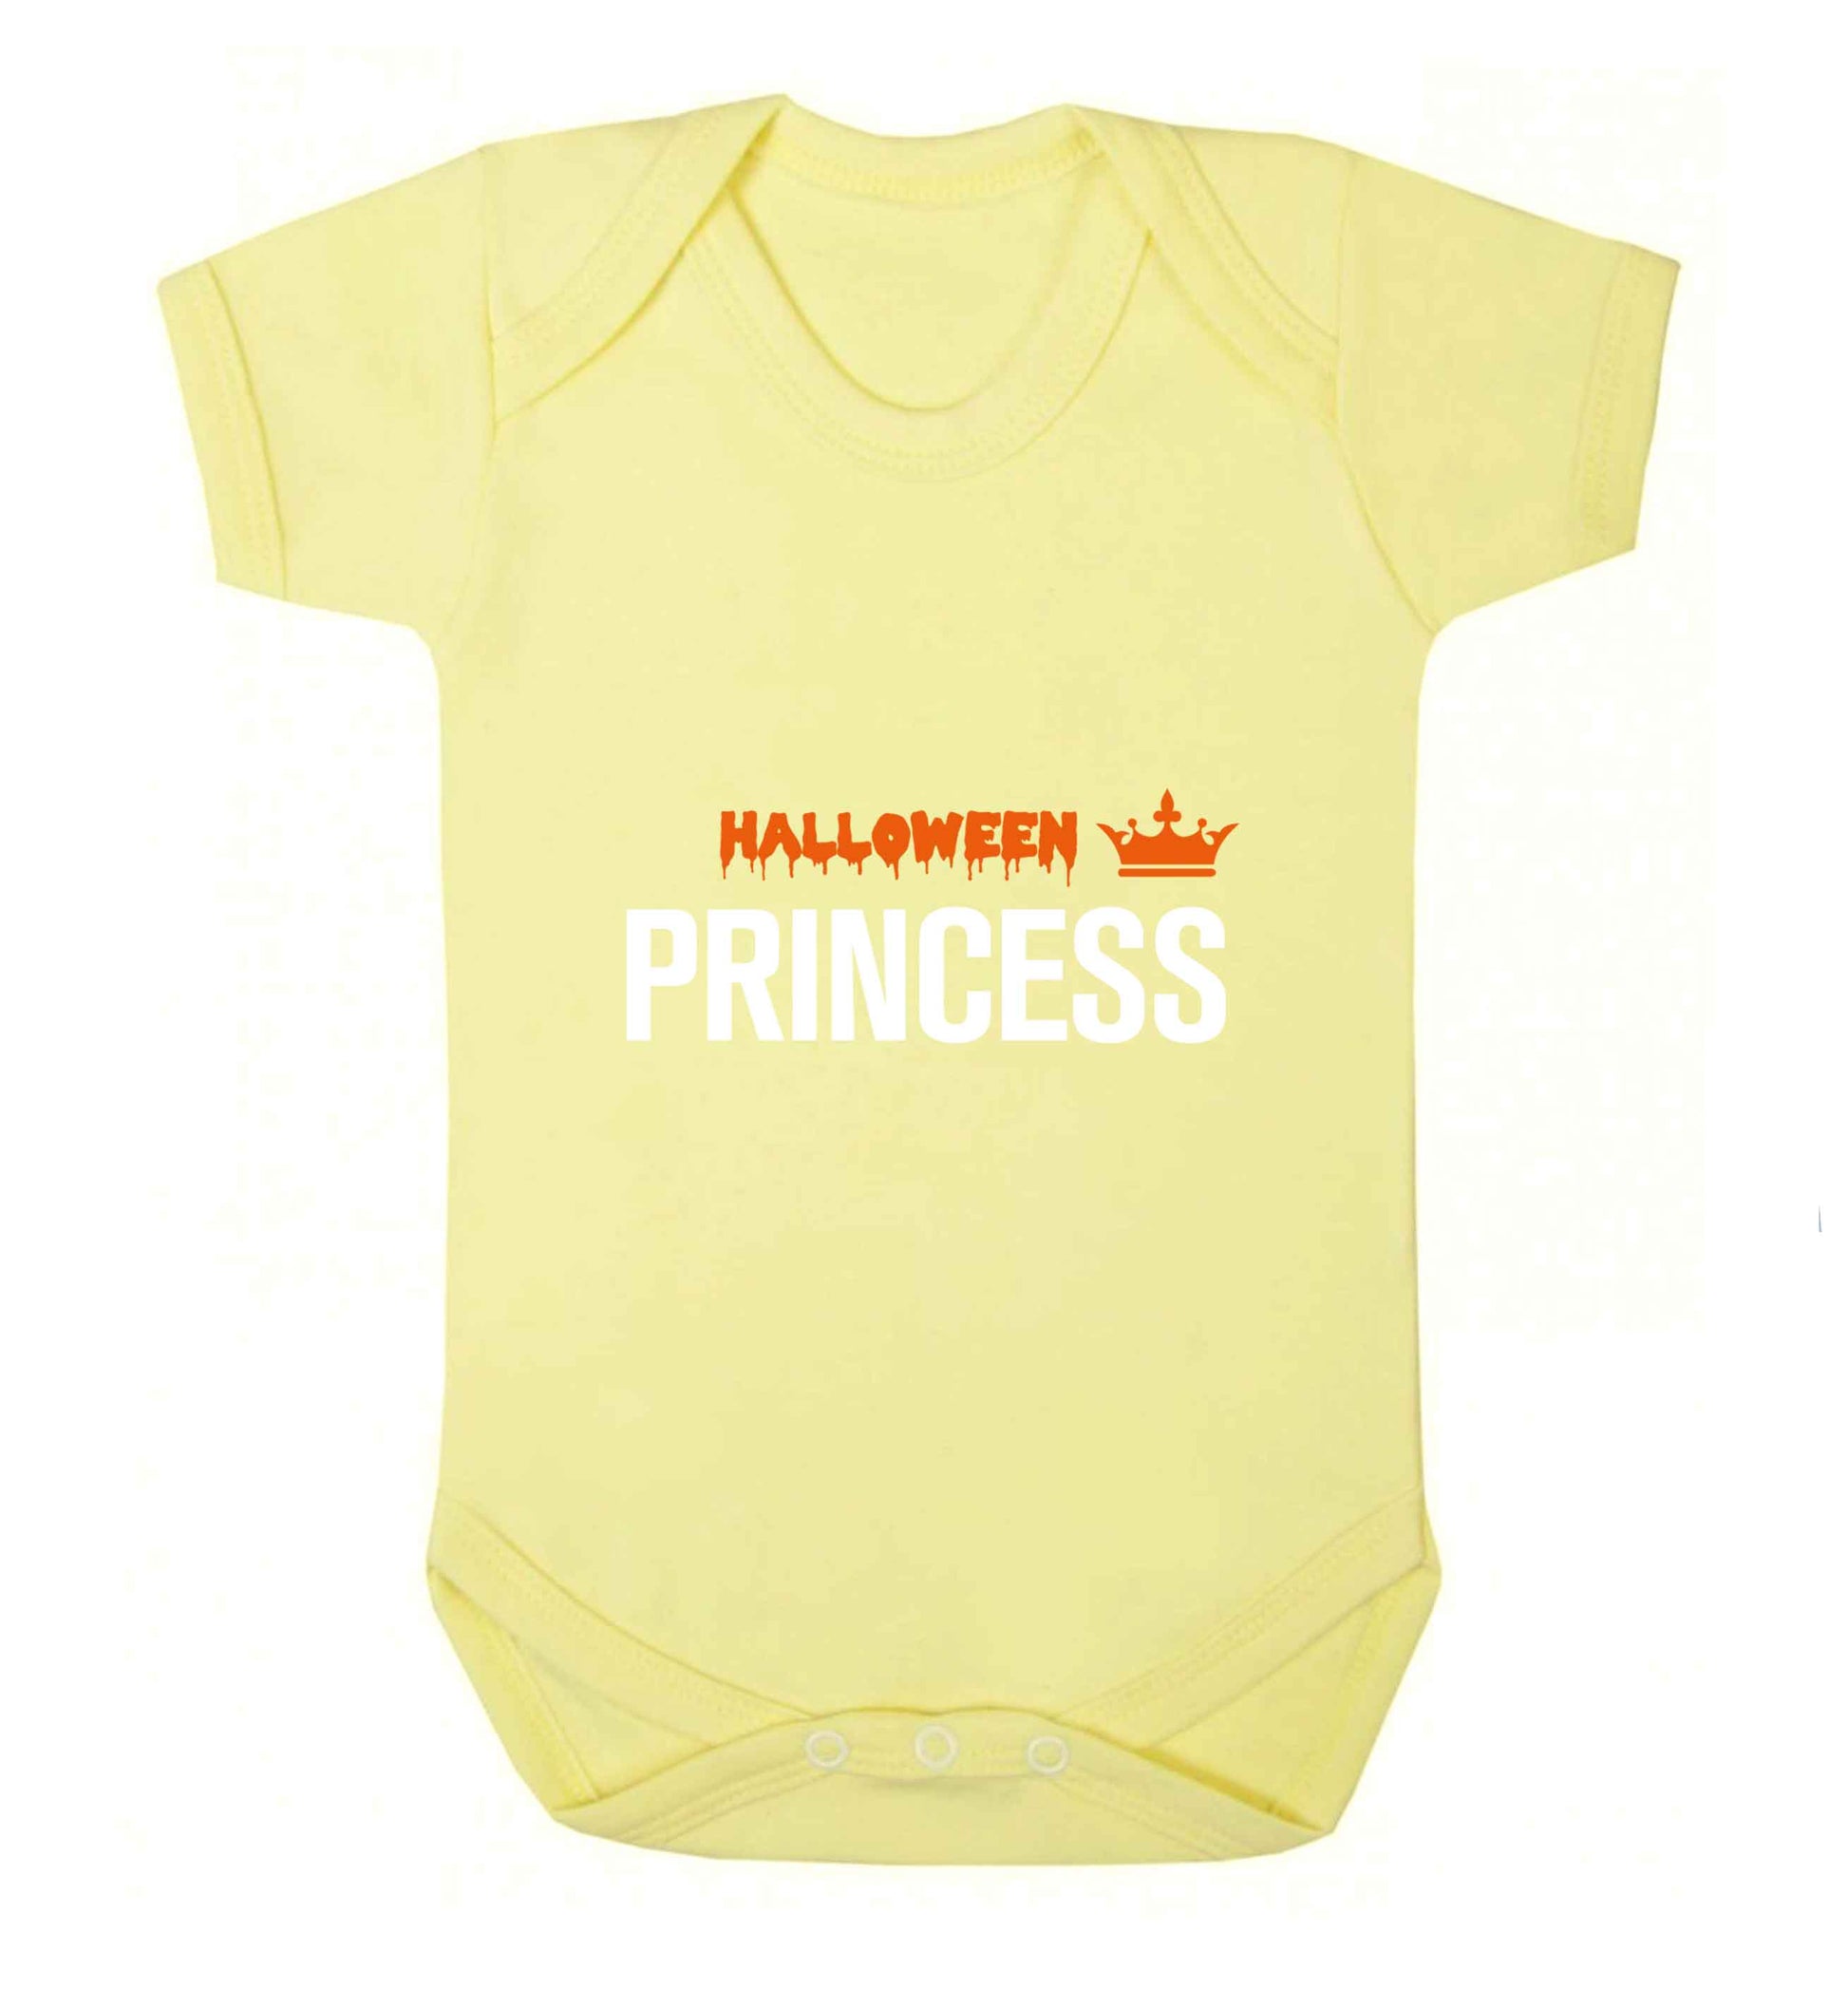 Halloween princess baby vest pale yellow 18-24 months